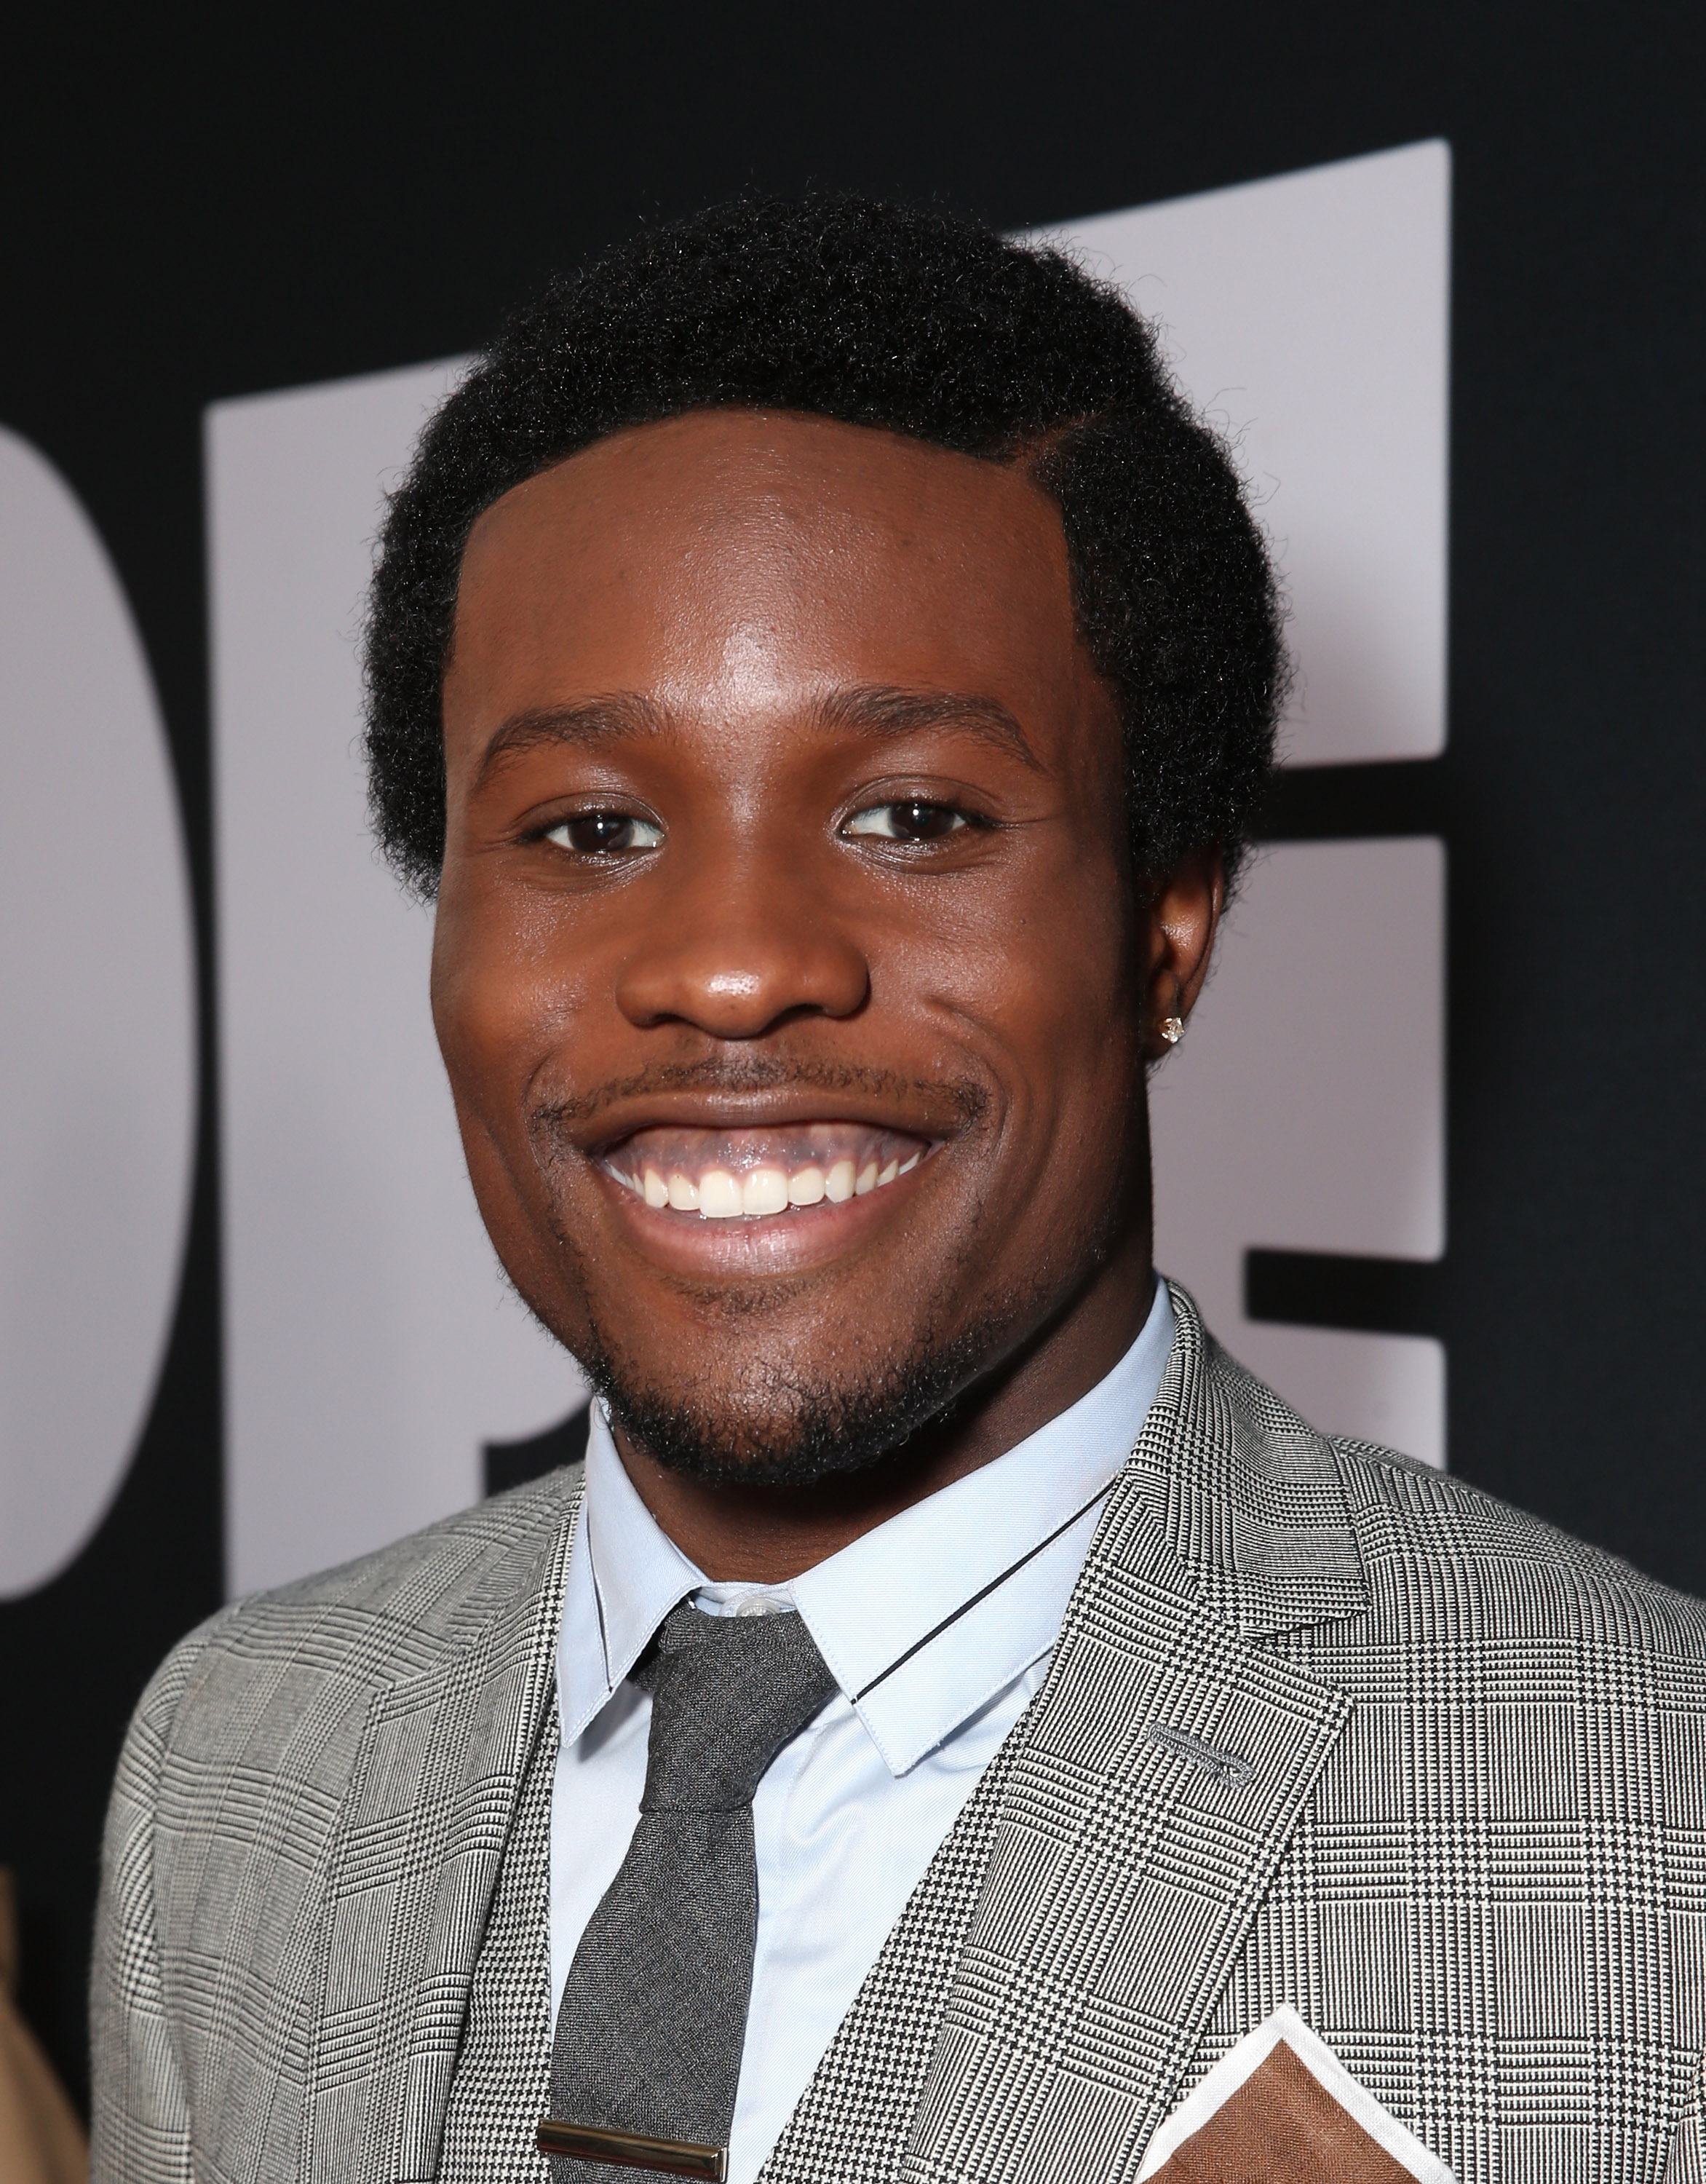 Shameik Moore attends the The Los Angeles Film Festival Premiere Of "Dope" on June 8, 2015.